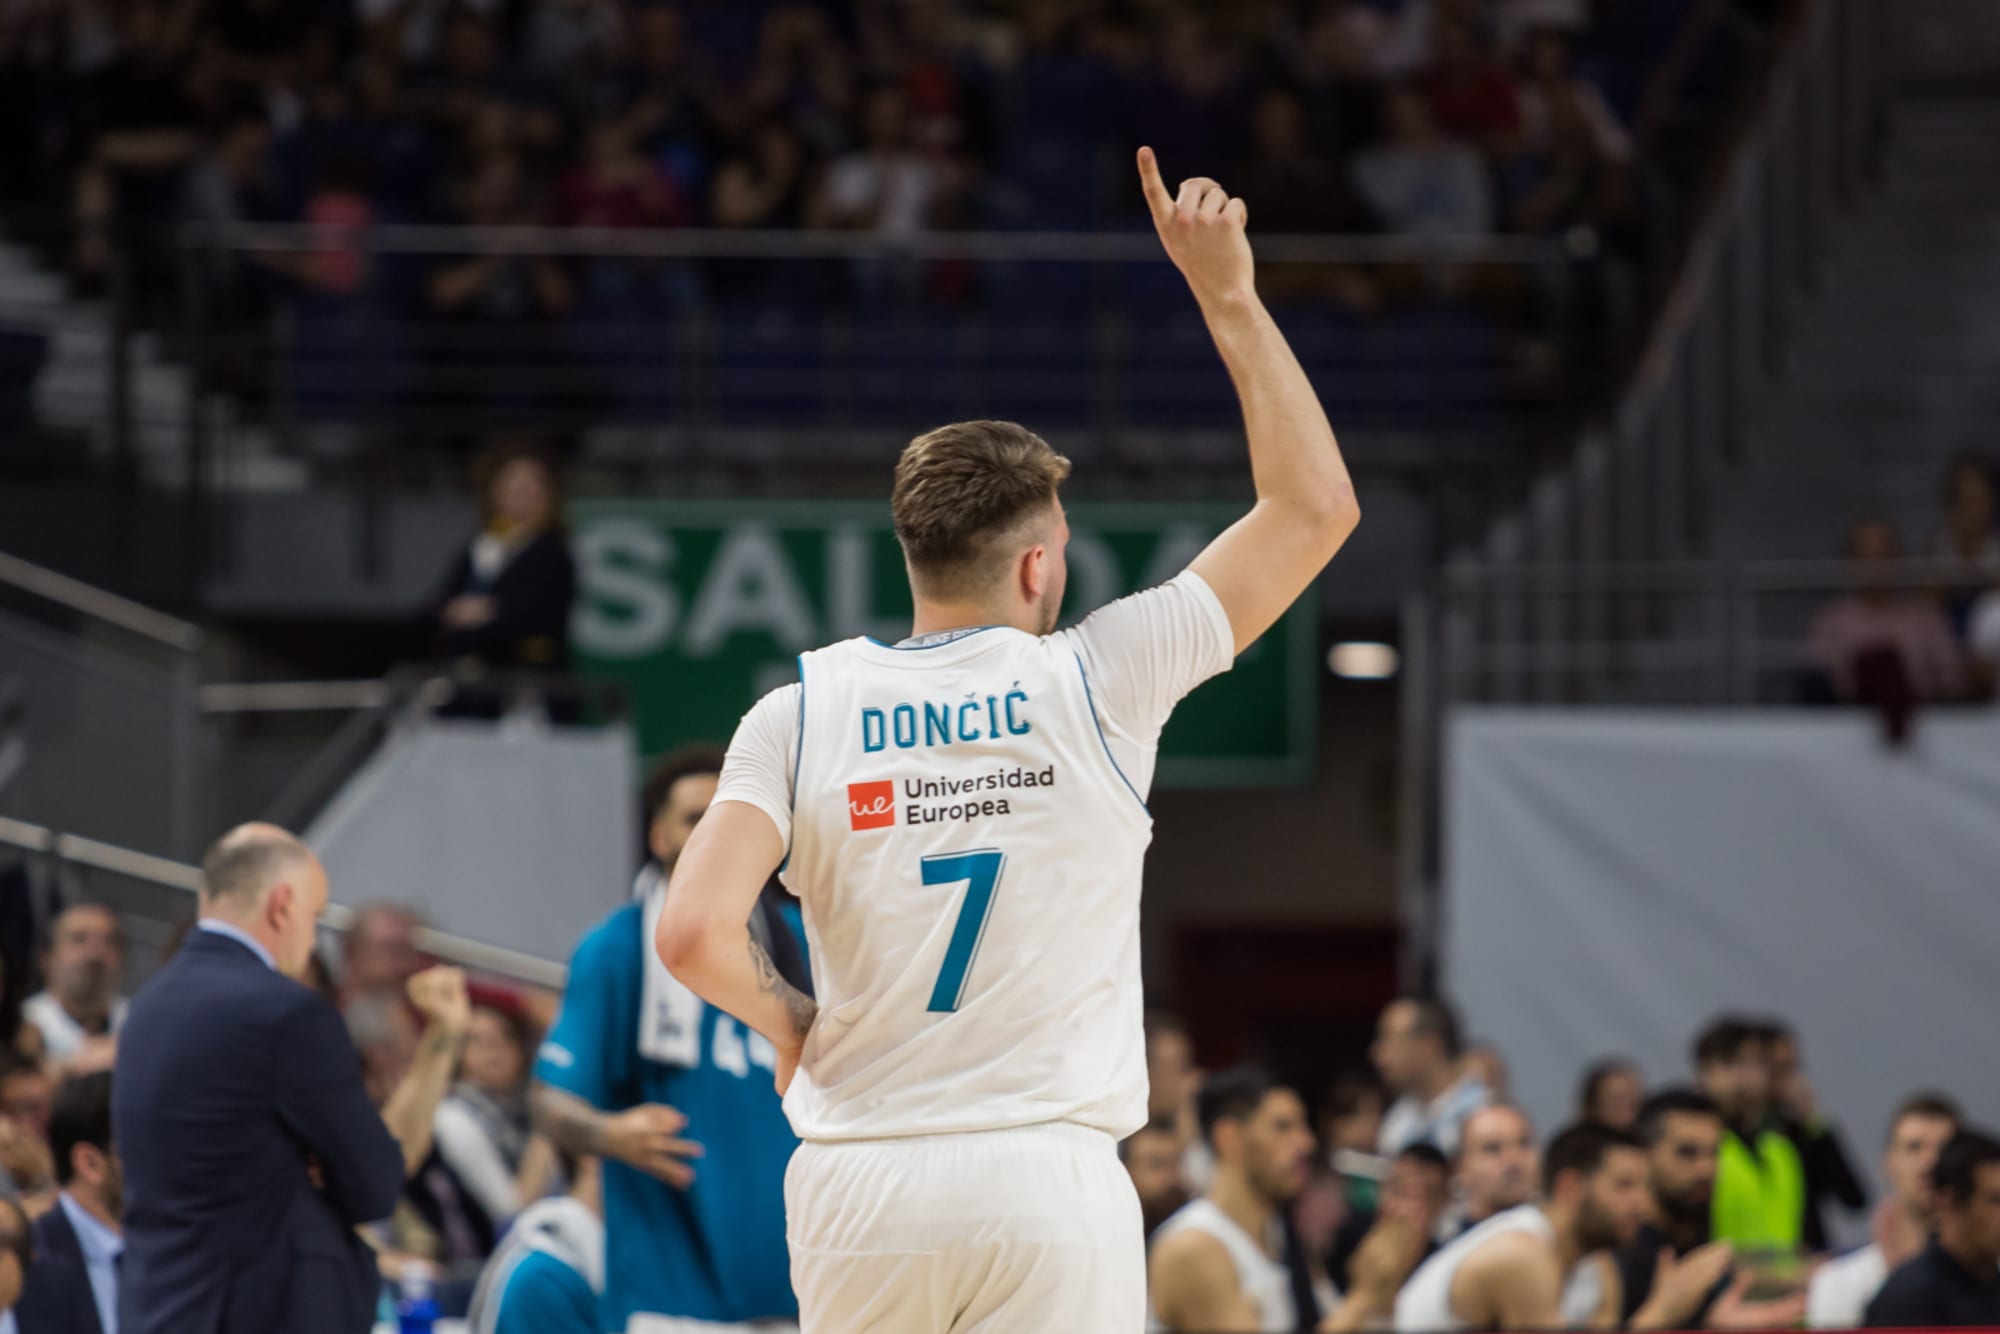 Concurso Analítico Oso polar NBA Draft: Luka Doncic hits clutch 3 to propel Real Madrid to another title